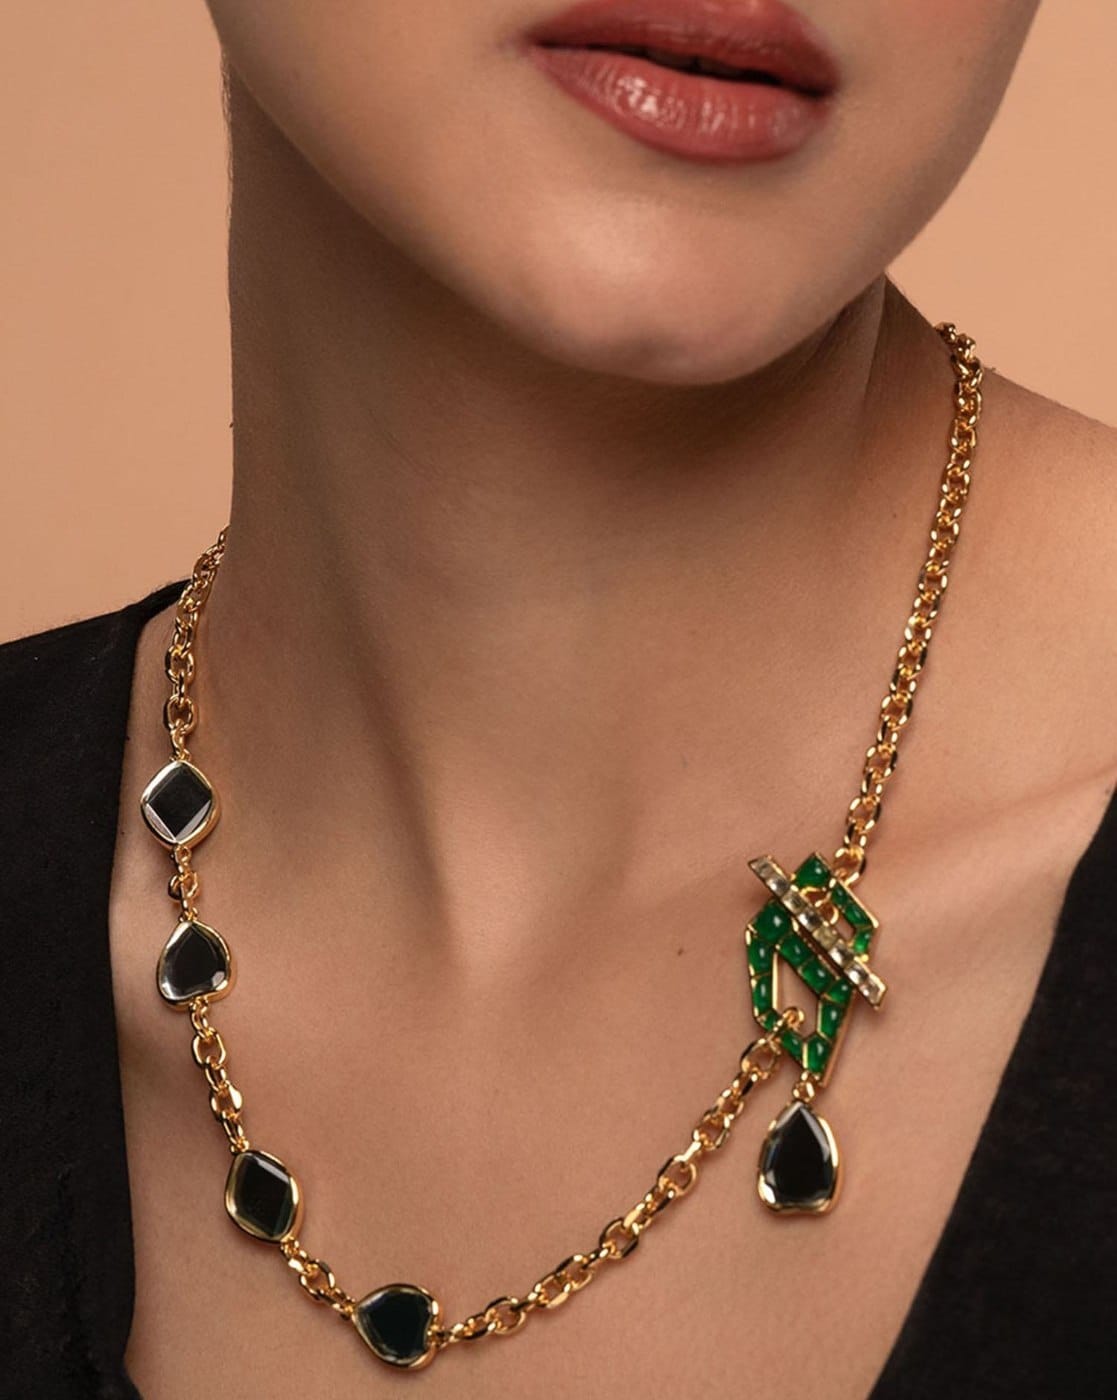 Buy Gold & Green Layered Necklace Online At Best Price @ Tata CLiQ